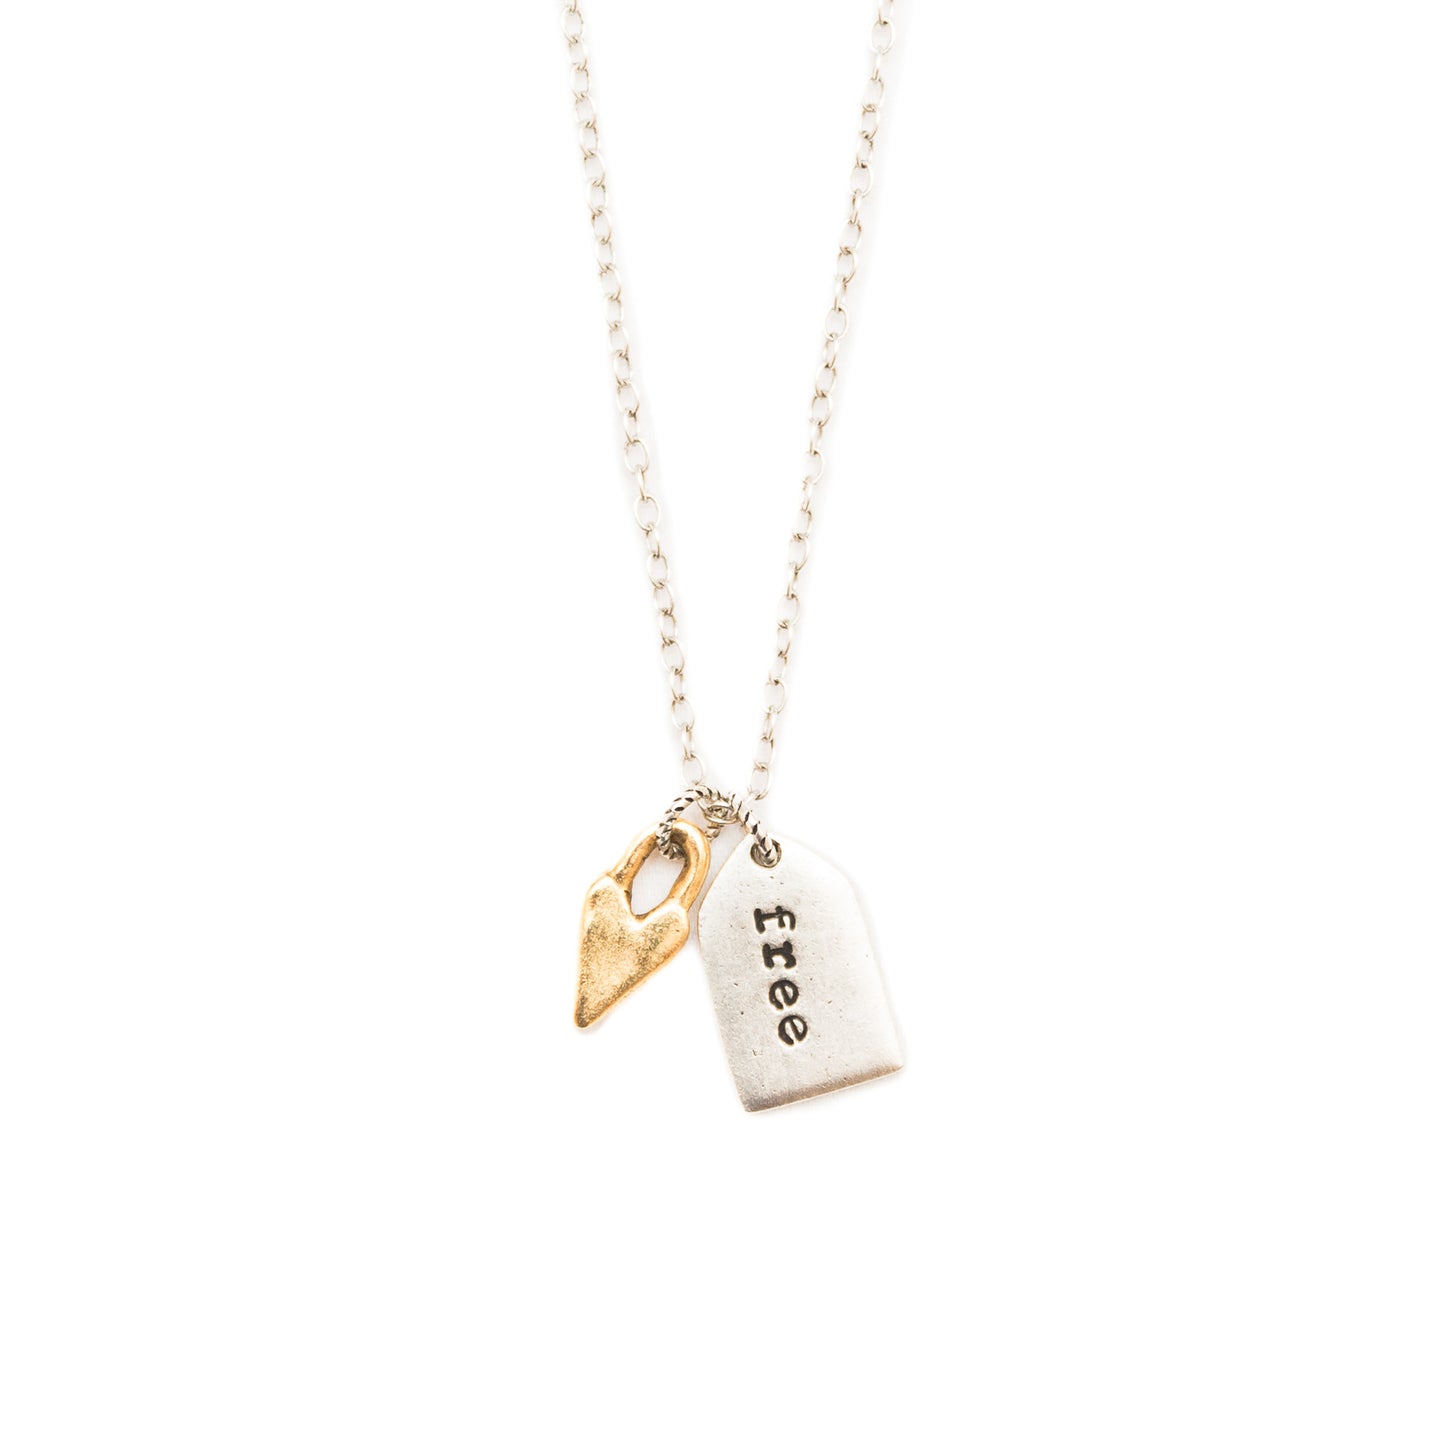 August "Loved & Free" Necklace